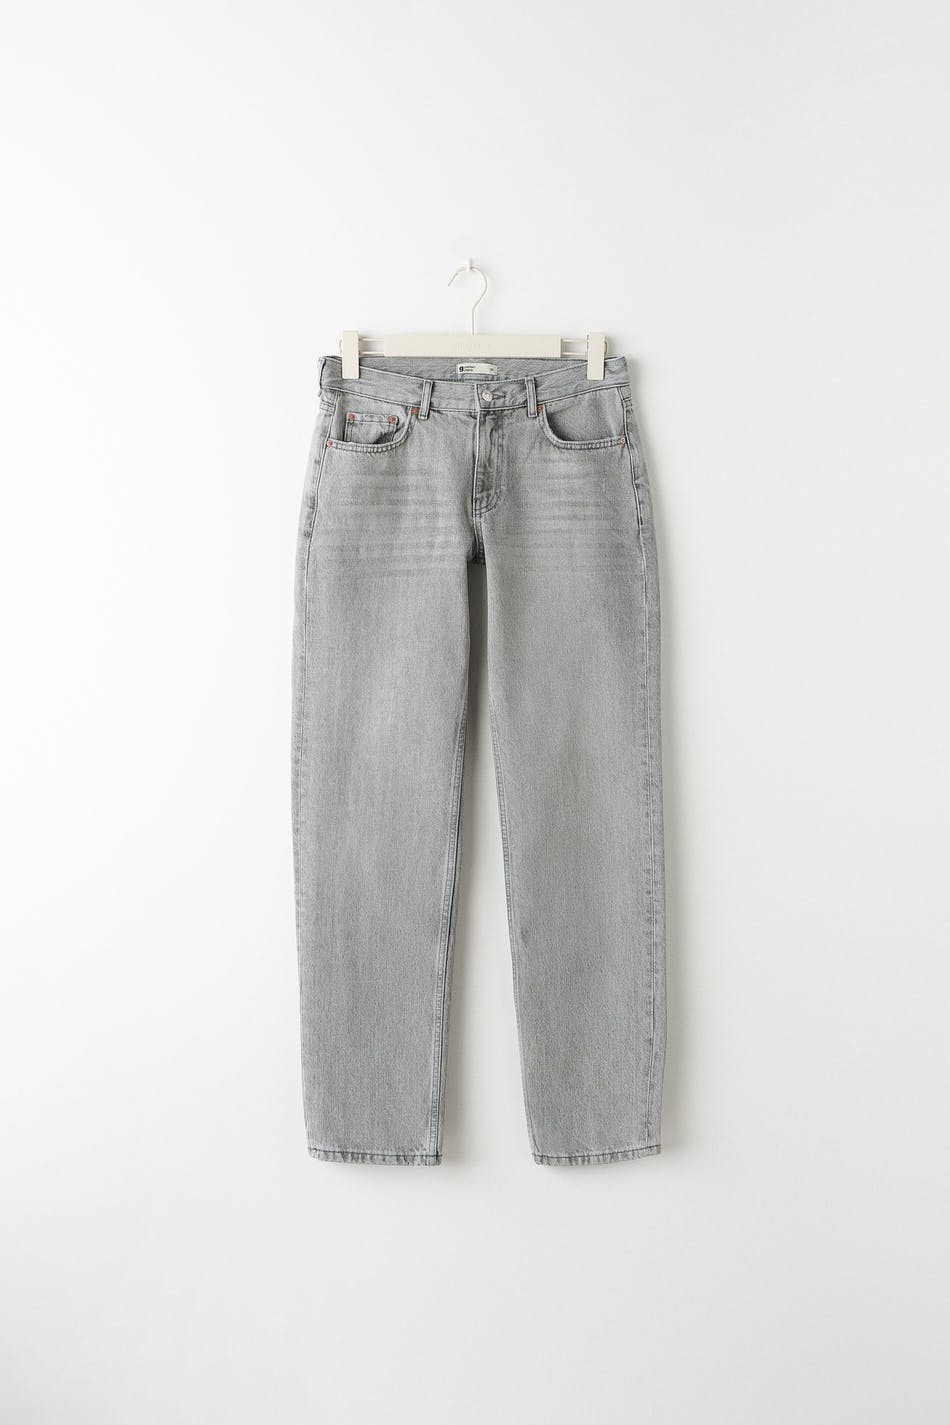 H&M+ True To You Skinny High Jeans - Gris oscuro - MUJER